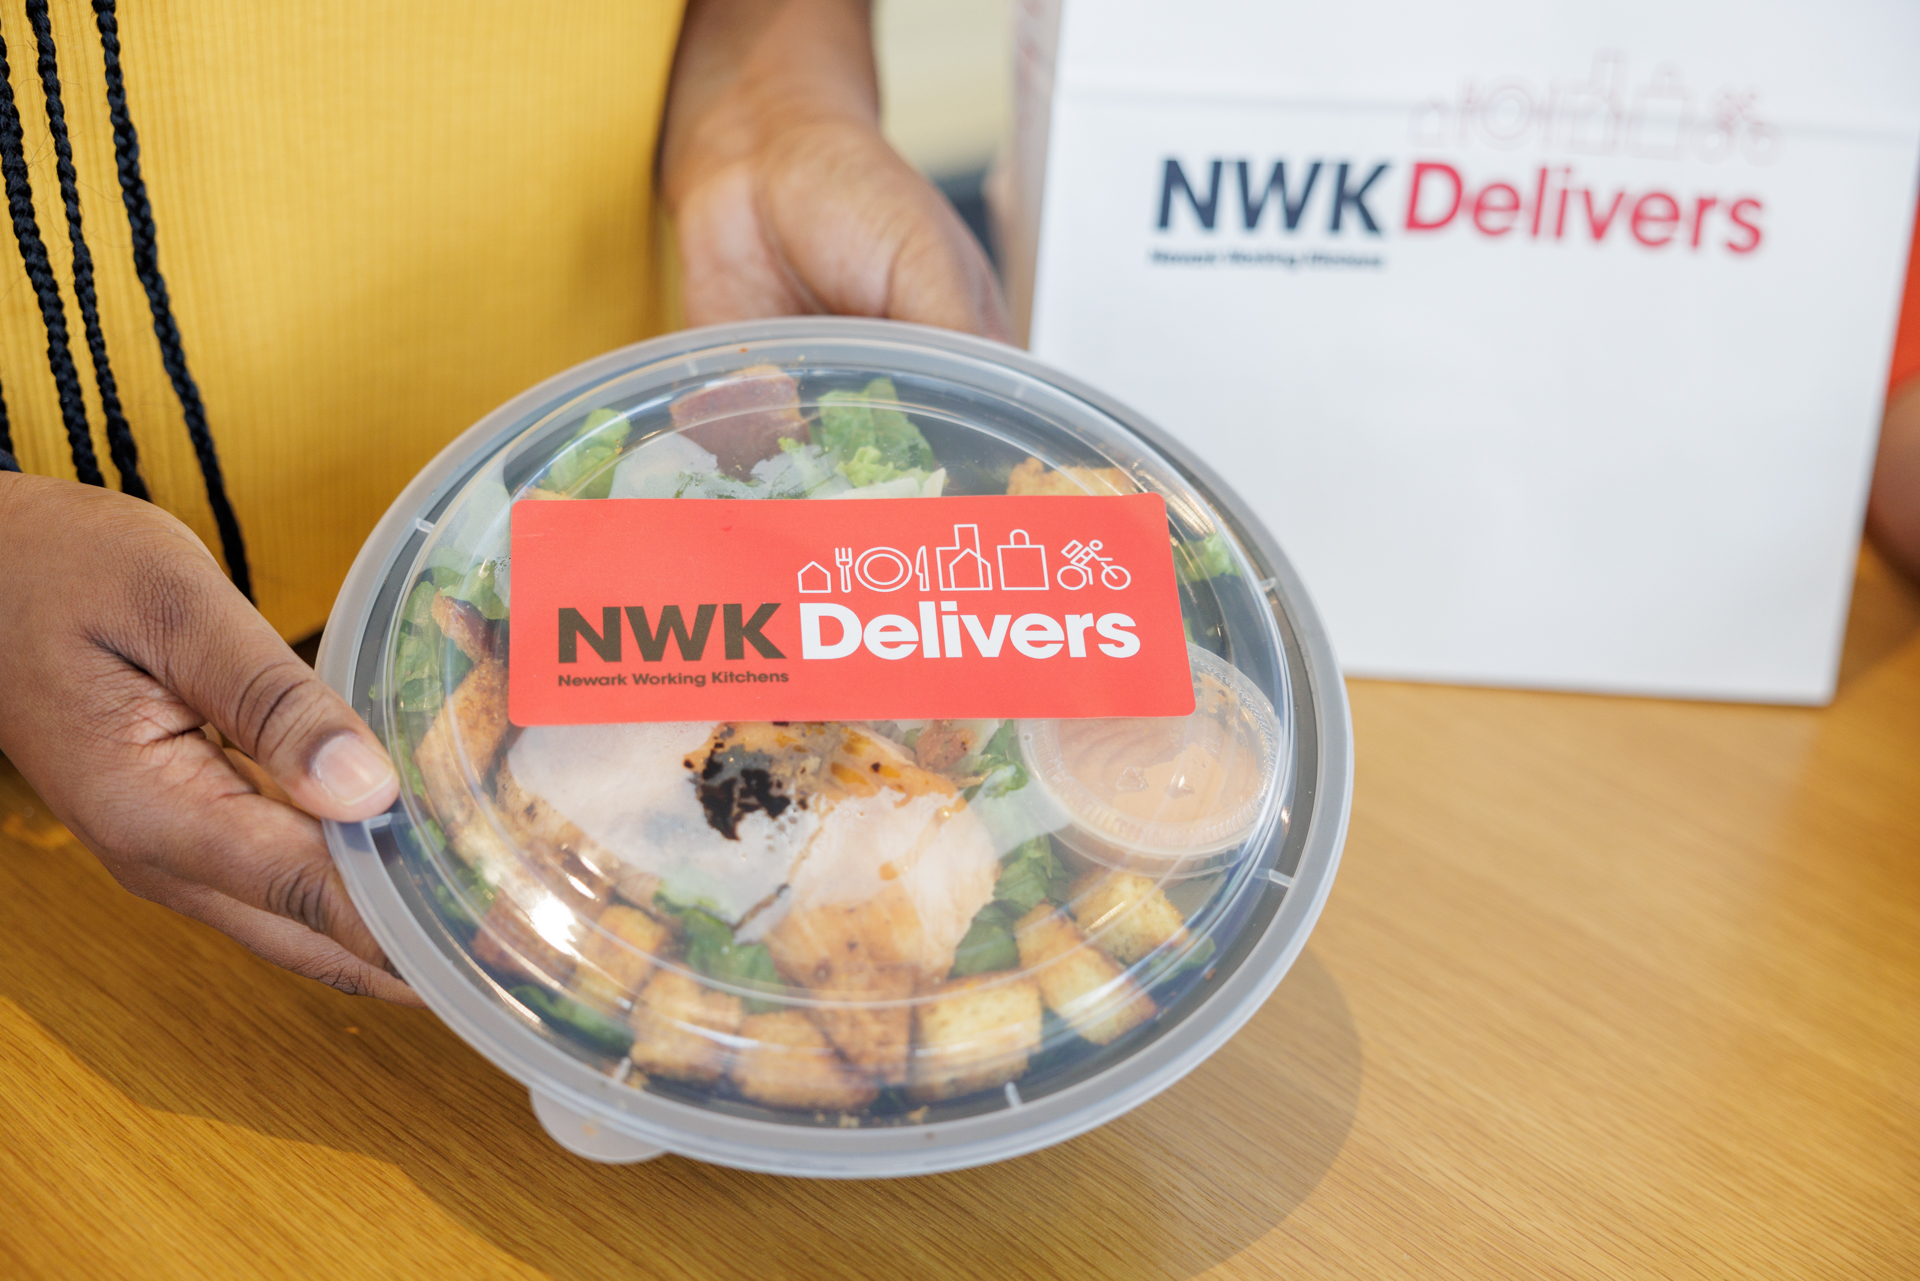 Food delivery - Newark Working Kitchens programme